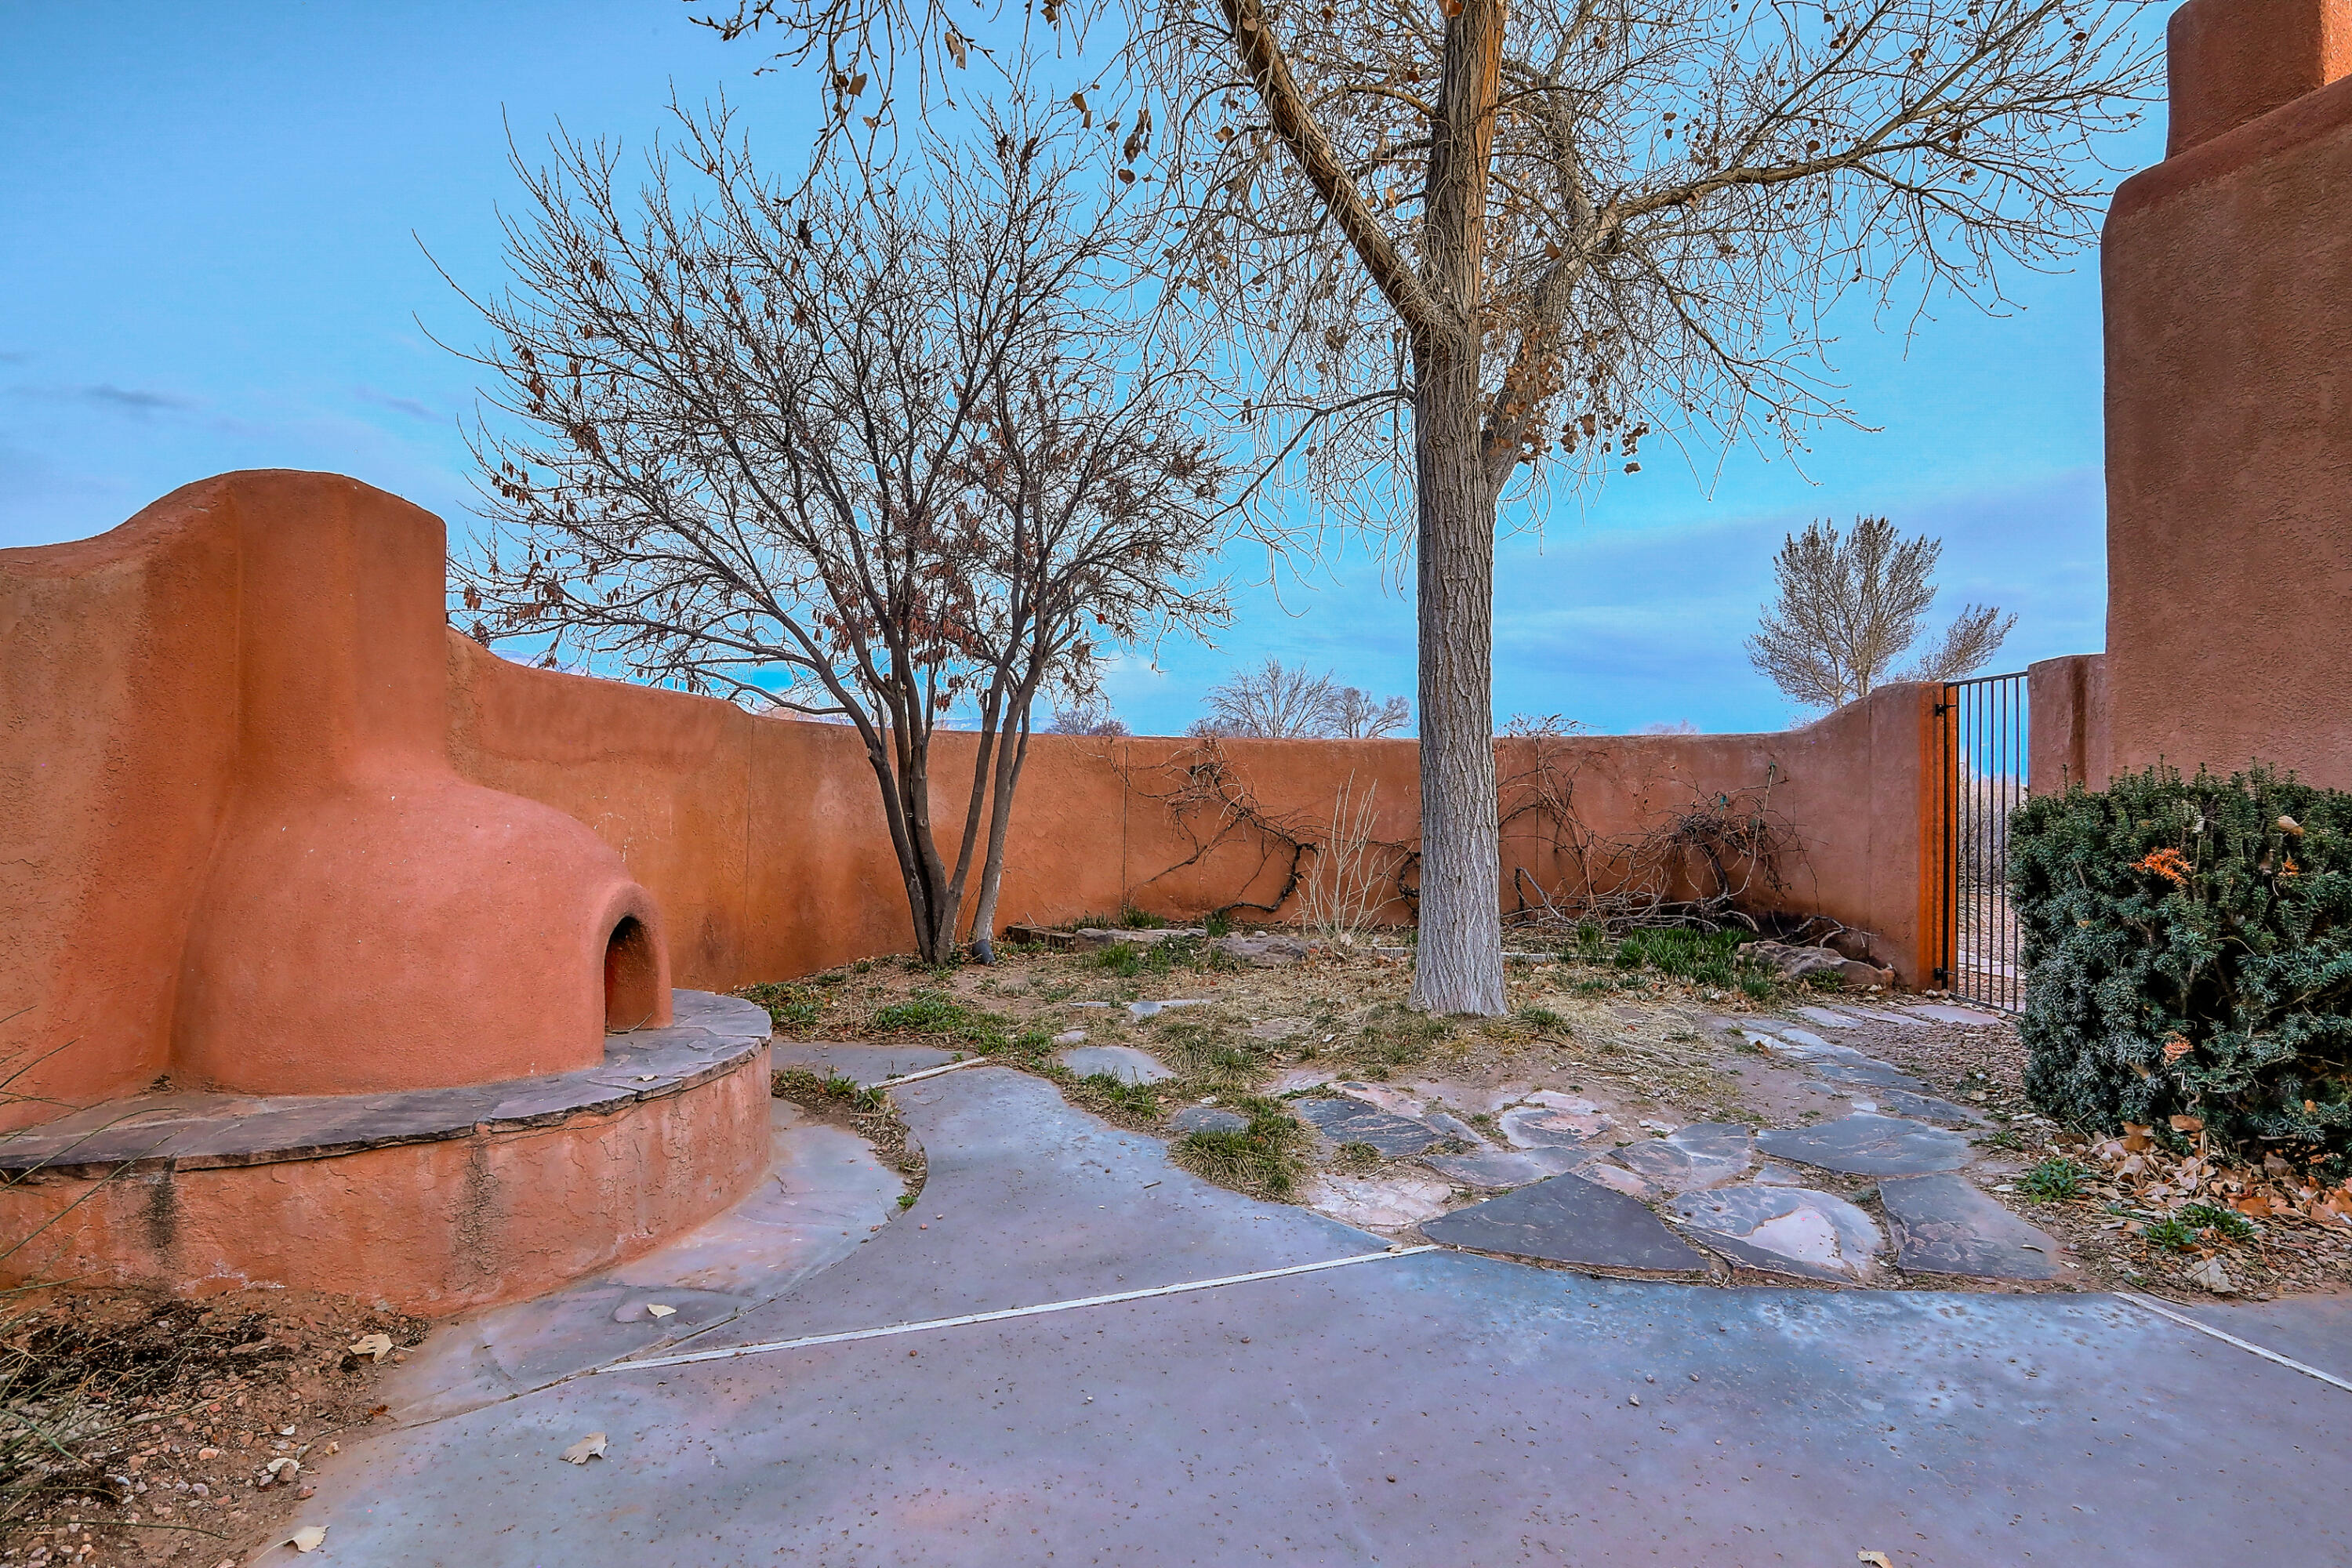 88 Lena Court, Corrales, New Mexico 87048, 3 Bedrooms Bedrooms, ,2 BathroomsBathrooms,Residential,For Sale,88 Lena Court,1058595